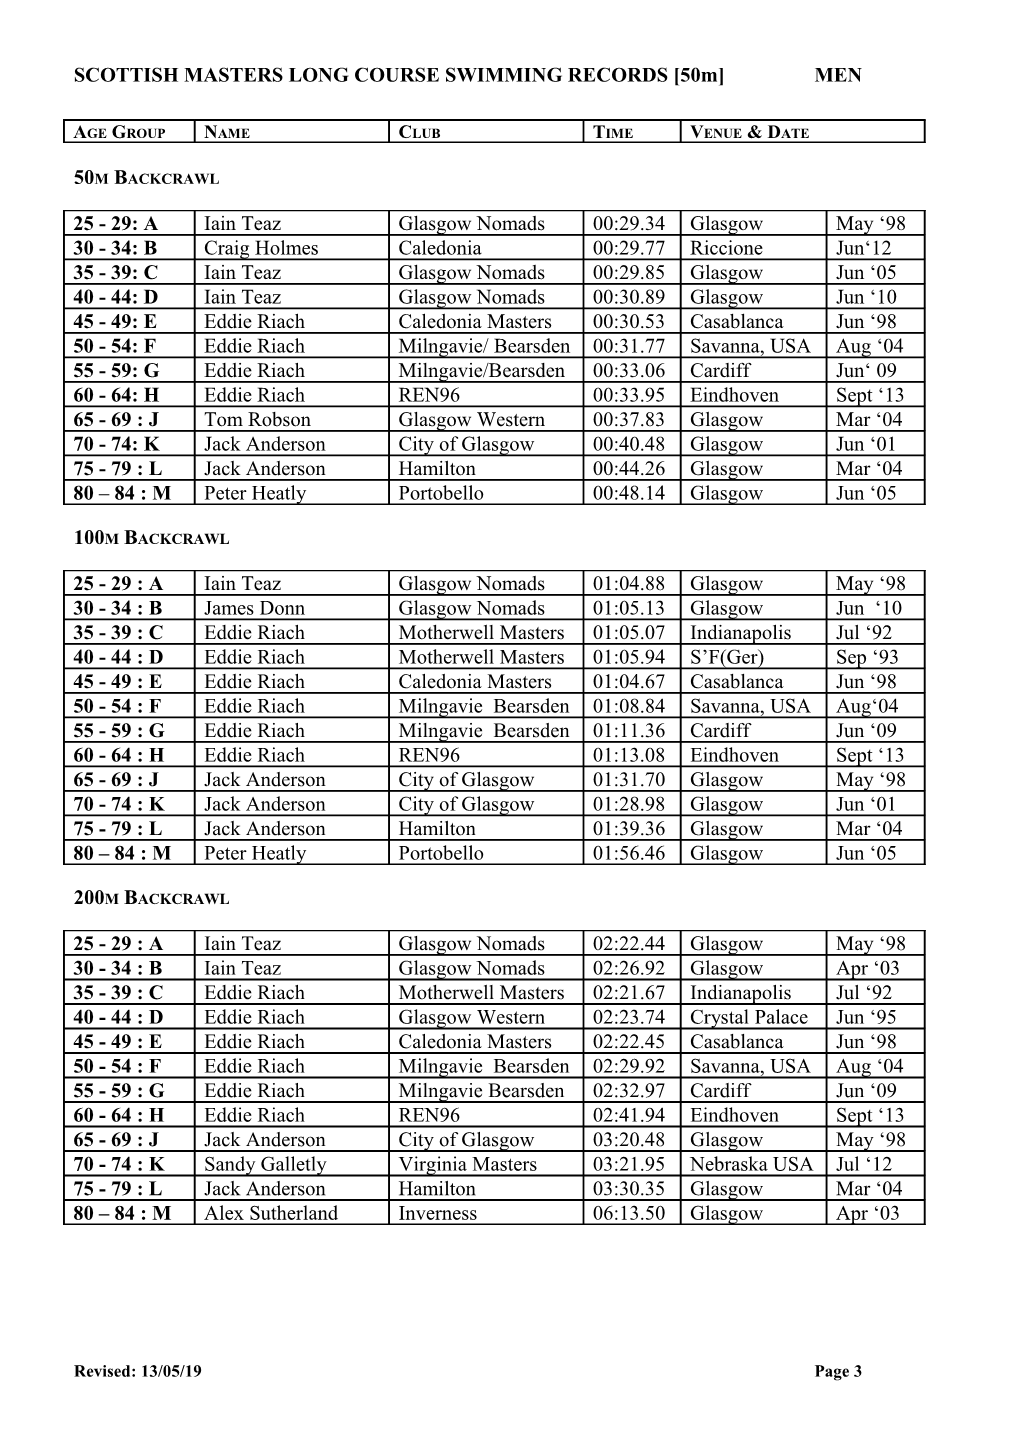 Long Course Swimming Records - Men